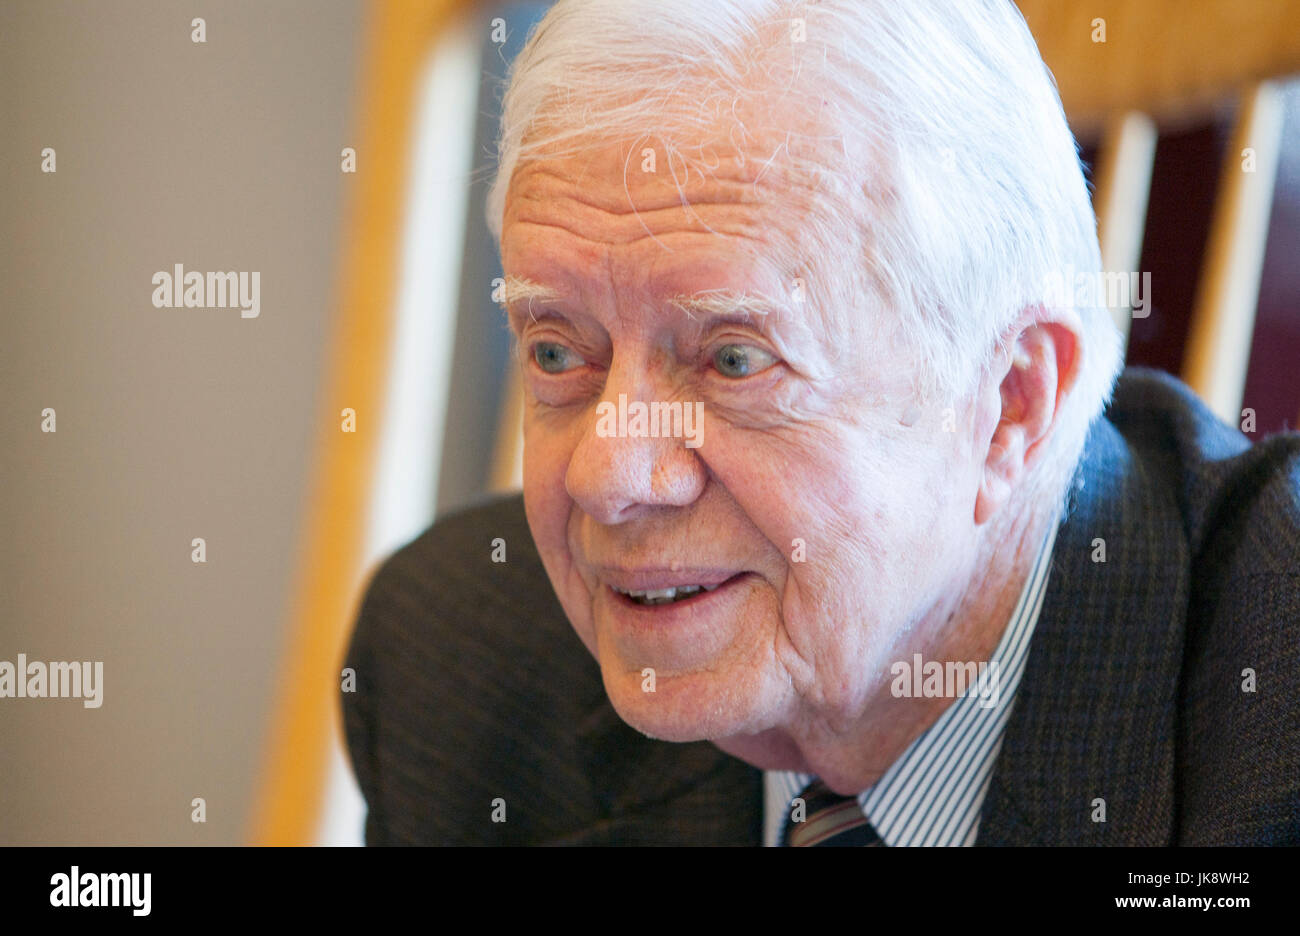 Former US President Jimmy Carter in an animated conversation in his office at The Carter Center in Atlanta, Georgia. James Earl "Jimmy" Carter Jr. is an American politician who served as the 39th President of the United States from 1977 to 1981. He previously was the 76th governor of Georgia from 1971 to 1975, after two terms in the Georgia State Senate from 1963 to 1967. Stock Photo